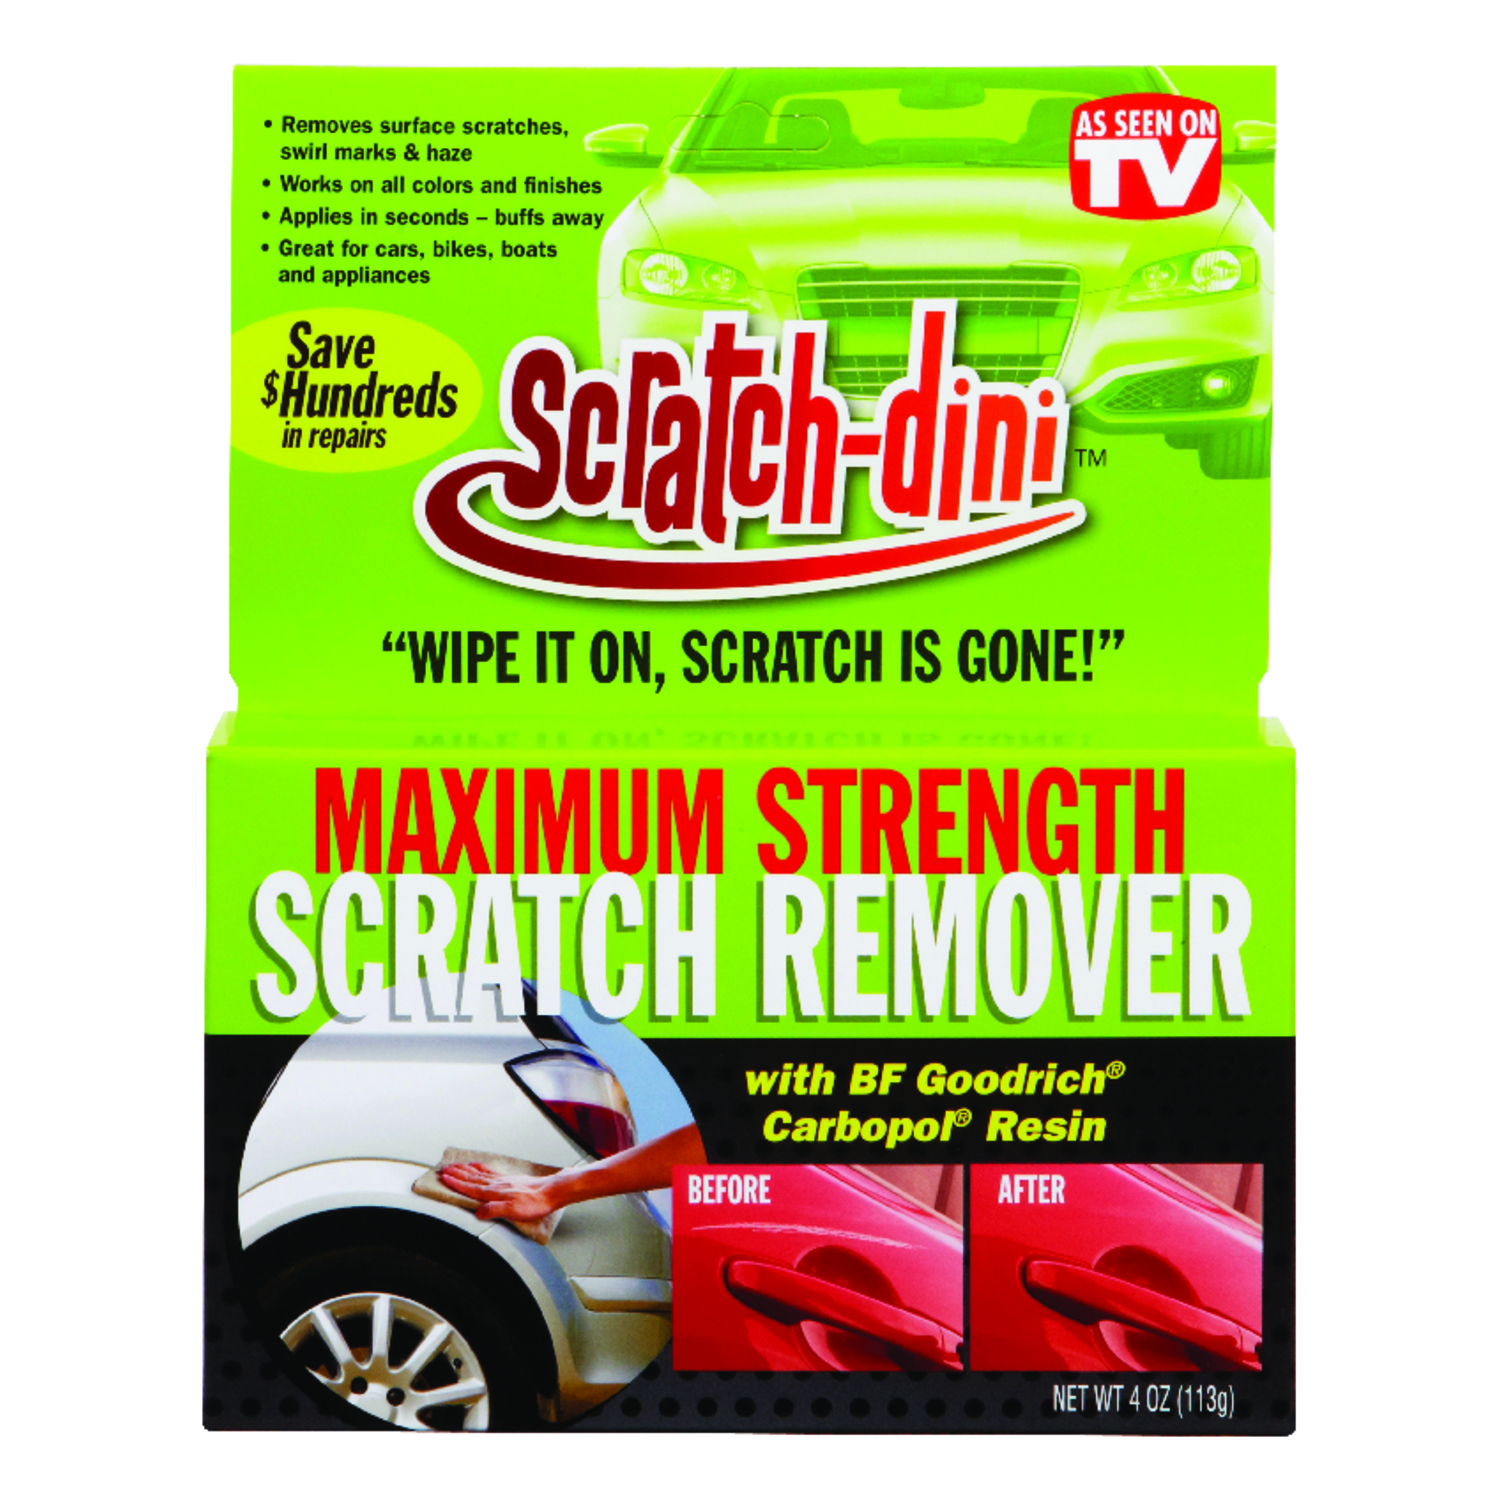 Photos - Other interior and decor Scratch-dini As Seen On TV Scratch Remover Lotion 1 pk SDR00108